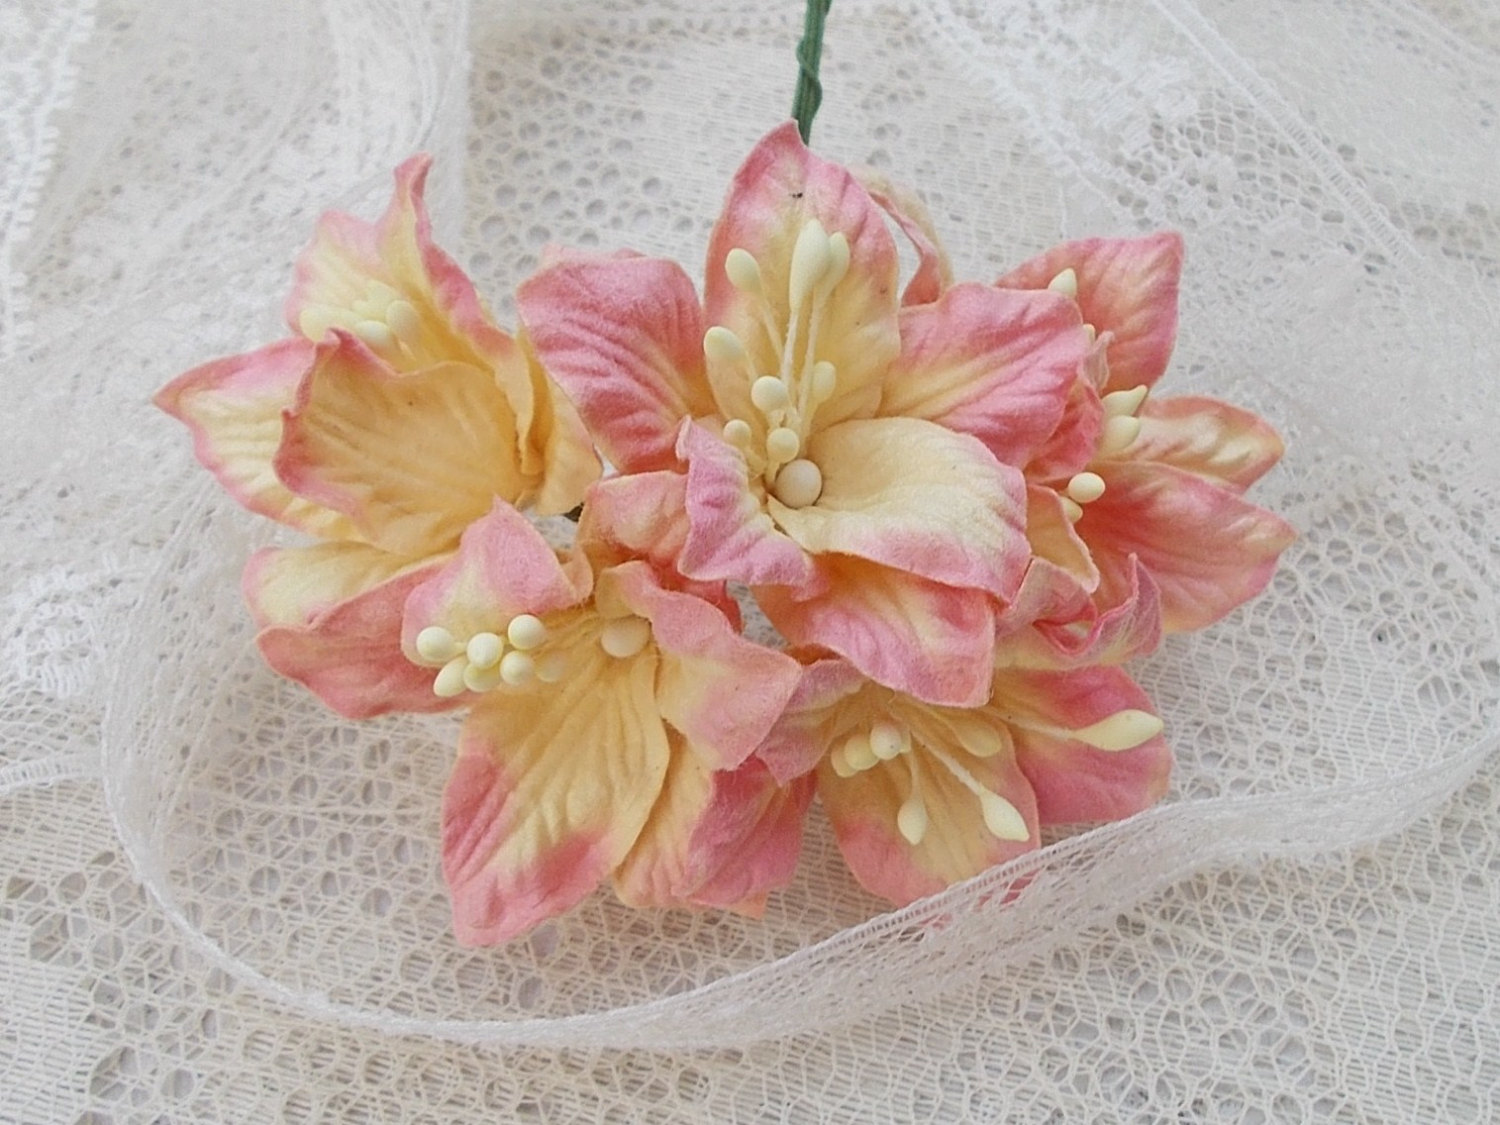 Shabby Chic Lily Flowers for Scrapbooking, Card Making, Altered Art, Tags, Mixed Media, Wedding, Cream and Pink steampunk buy now online